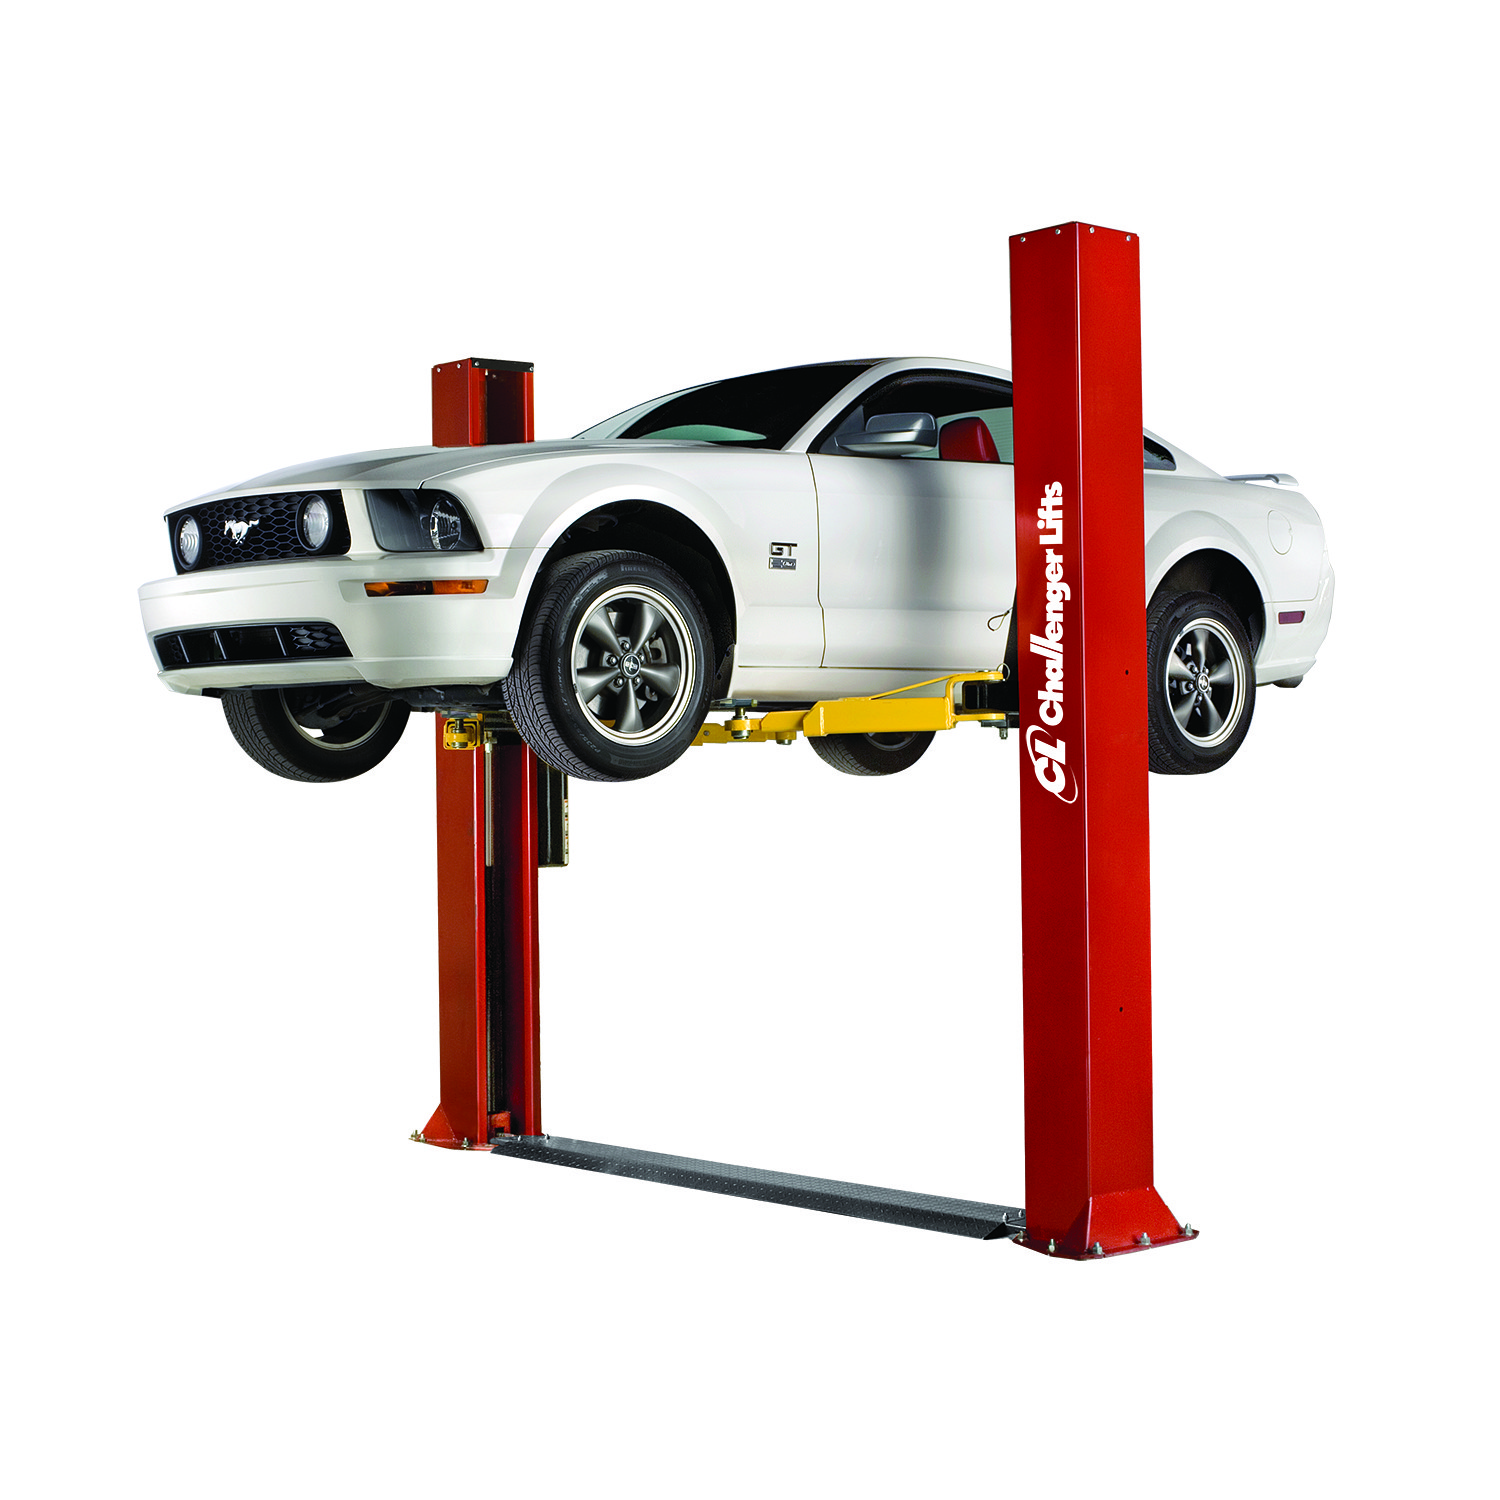 With a 9,000 lb. capacity and 10’ 7/8” overall column height, Challenger’s CLFP9 2-post is ideal for low ceiling applications. 3-stage front and 3-stage rear arms provide maximum sweep, arm retraction and reach. A low-profile drive-over floor plate allows for easy vehicle positioning, which makes it great for home enthusiast garages or professional service shops.